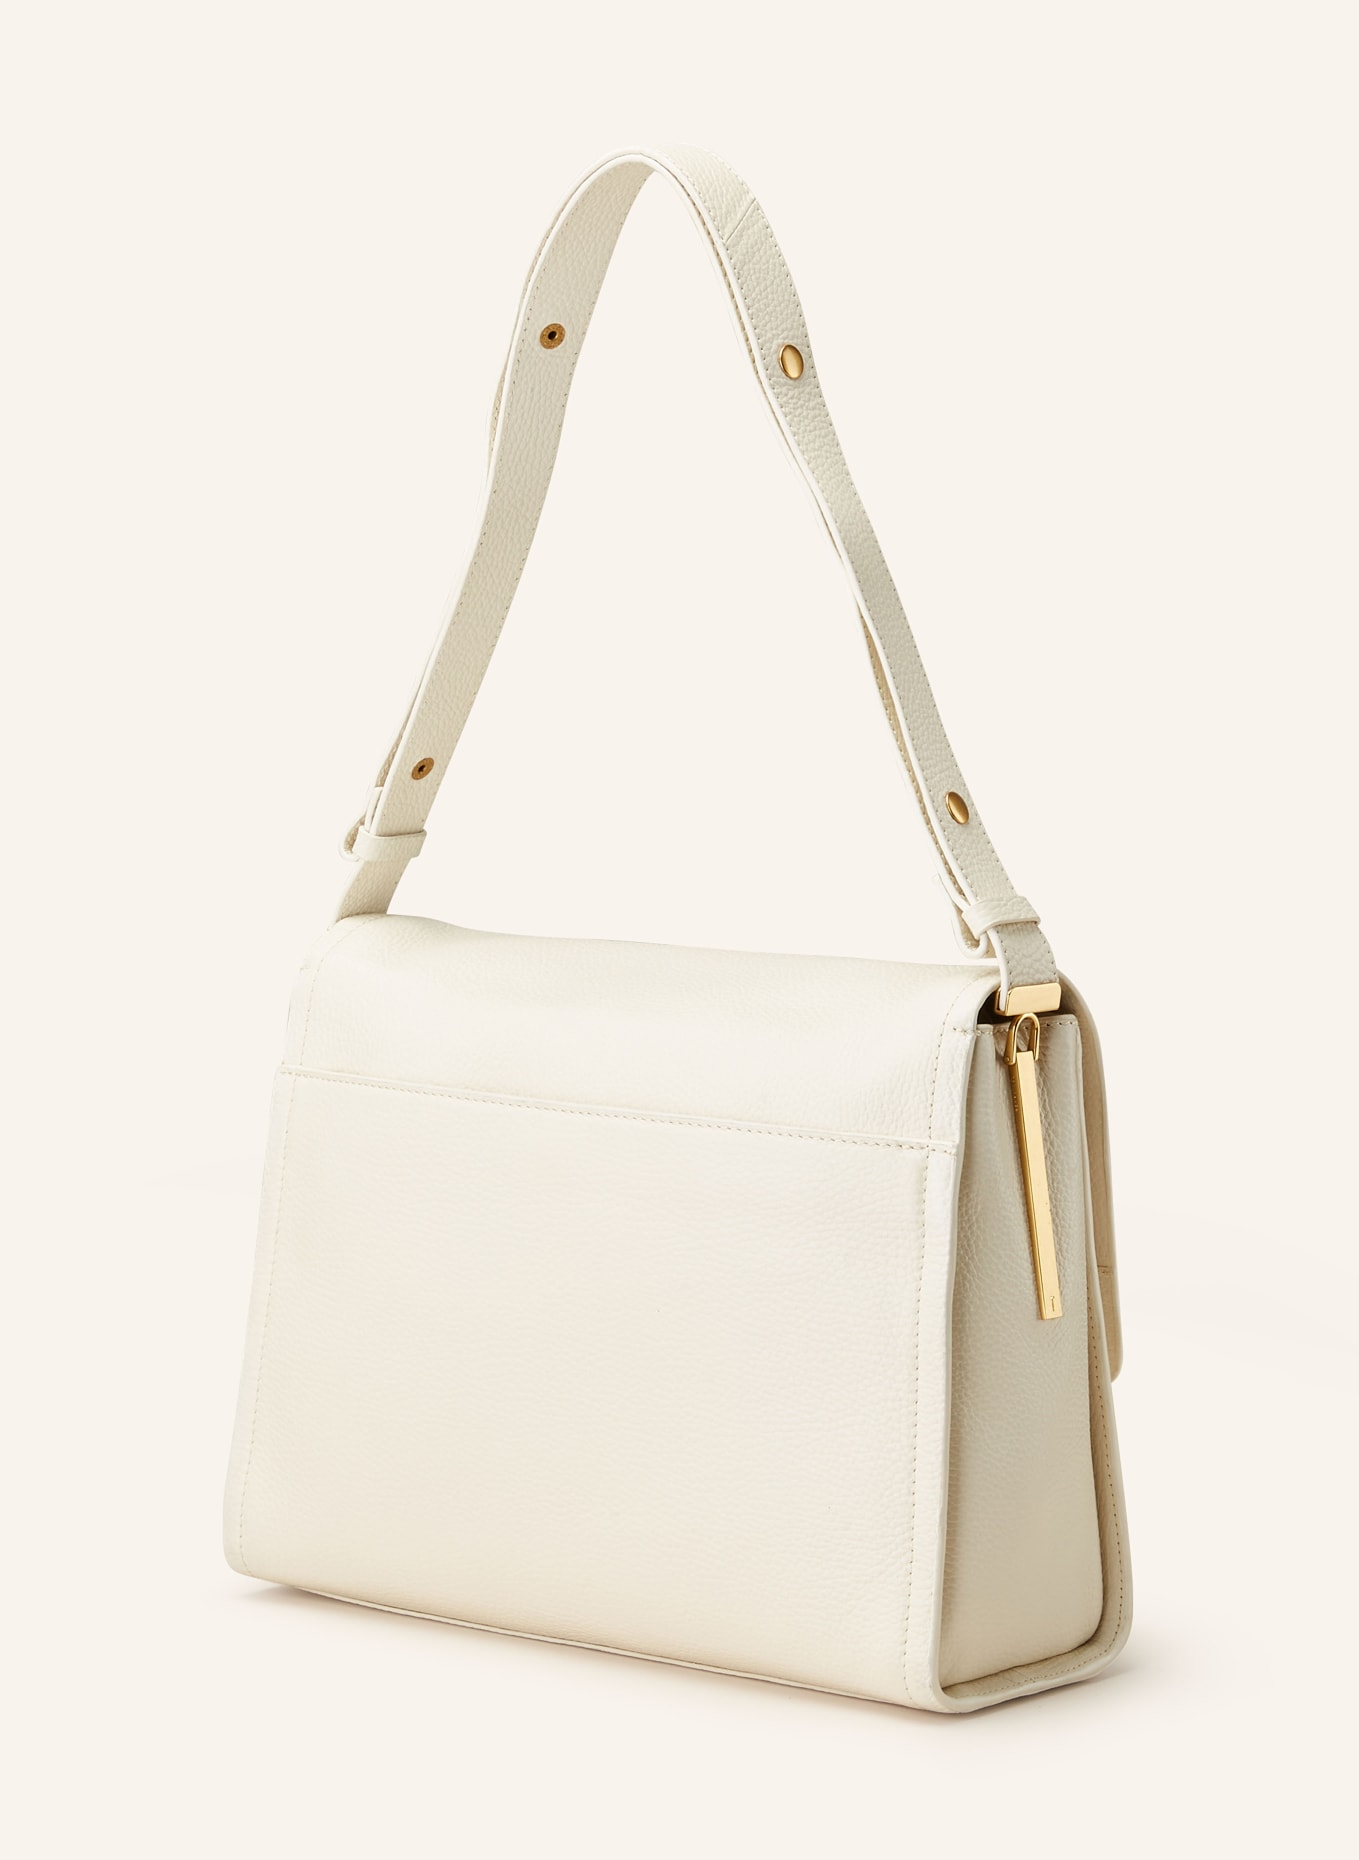 TED BAKER Schultertasche IMILILY LARGE, Farbe: WEISS (Bild 2)